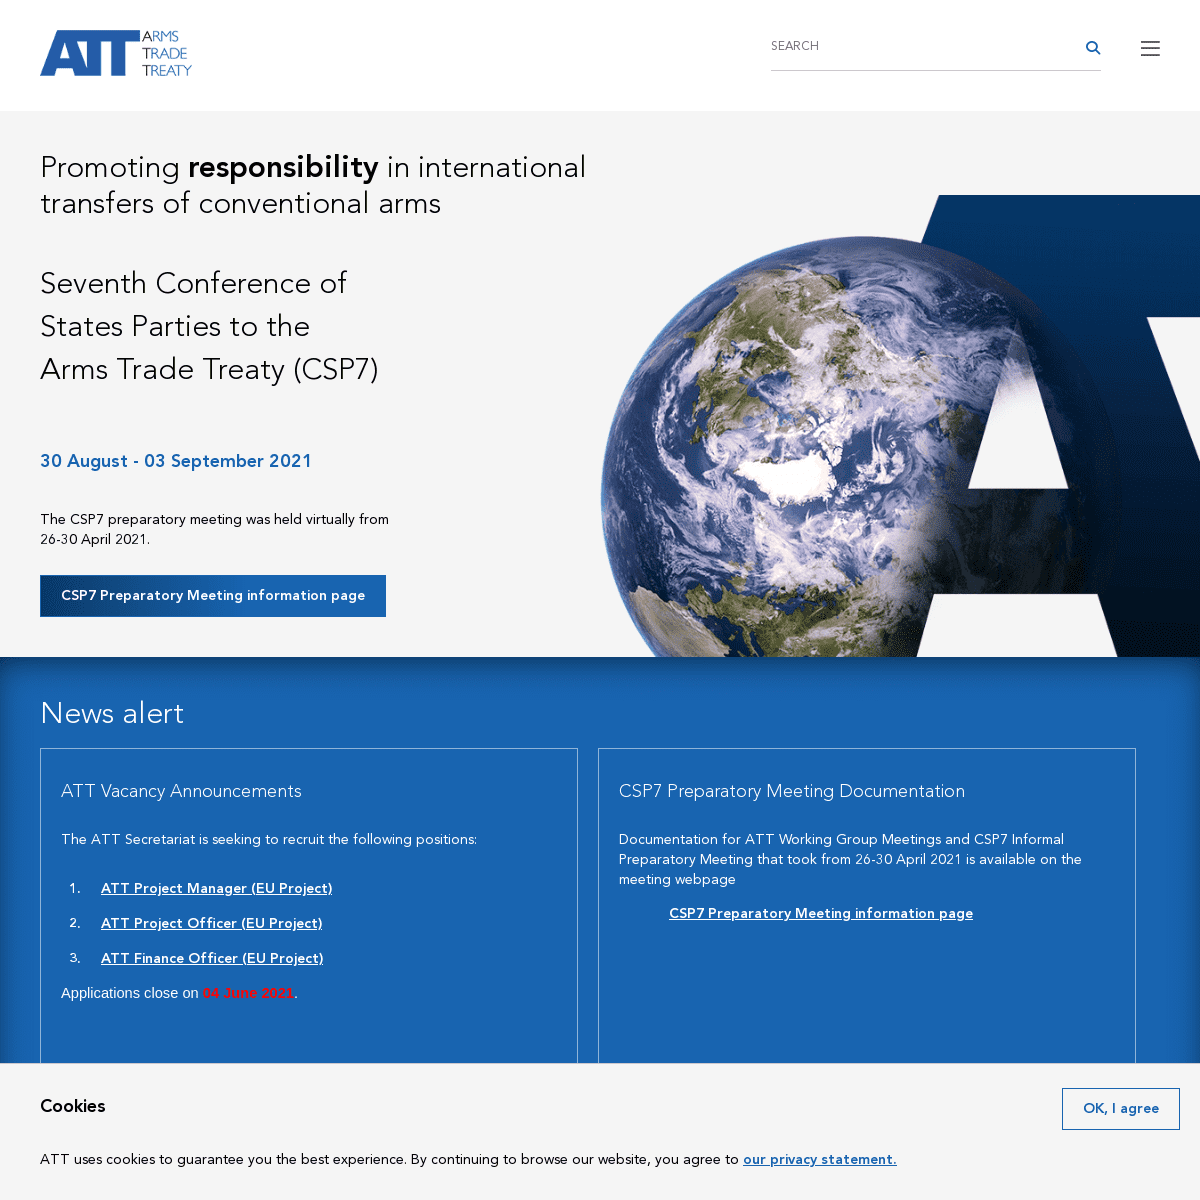 A complete backup of https://thearmstradetreaty.org